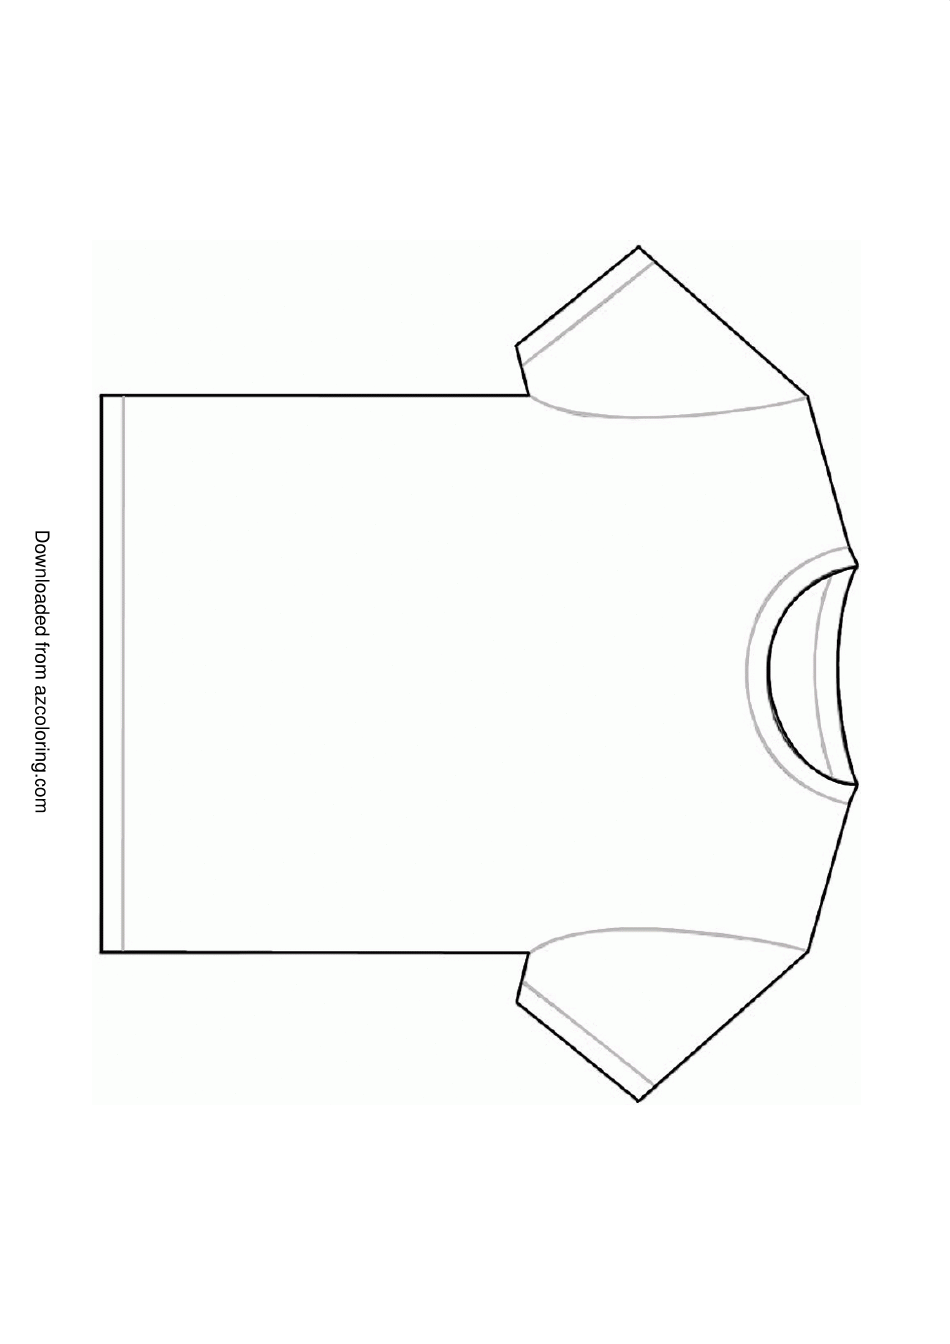 Blank T-Shirt Template – Customizable Design for Creating Your Own T-Shirts